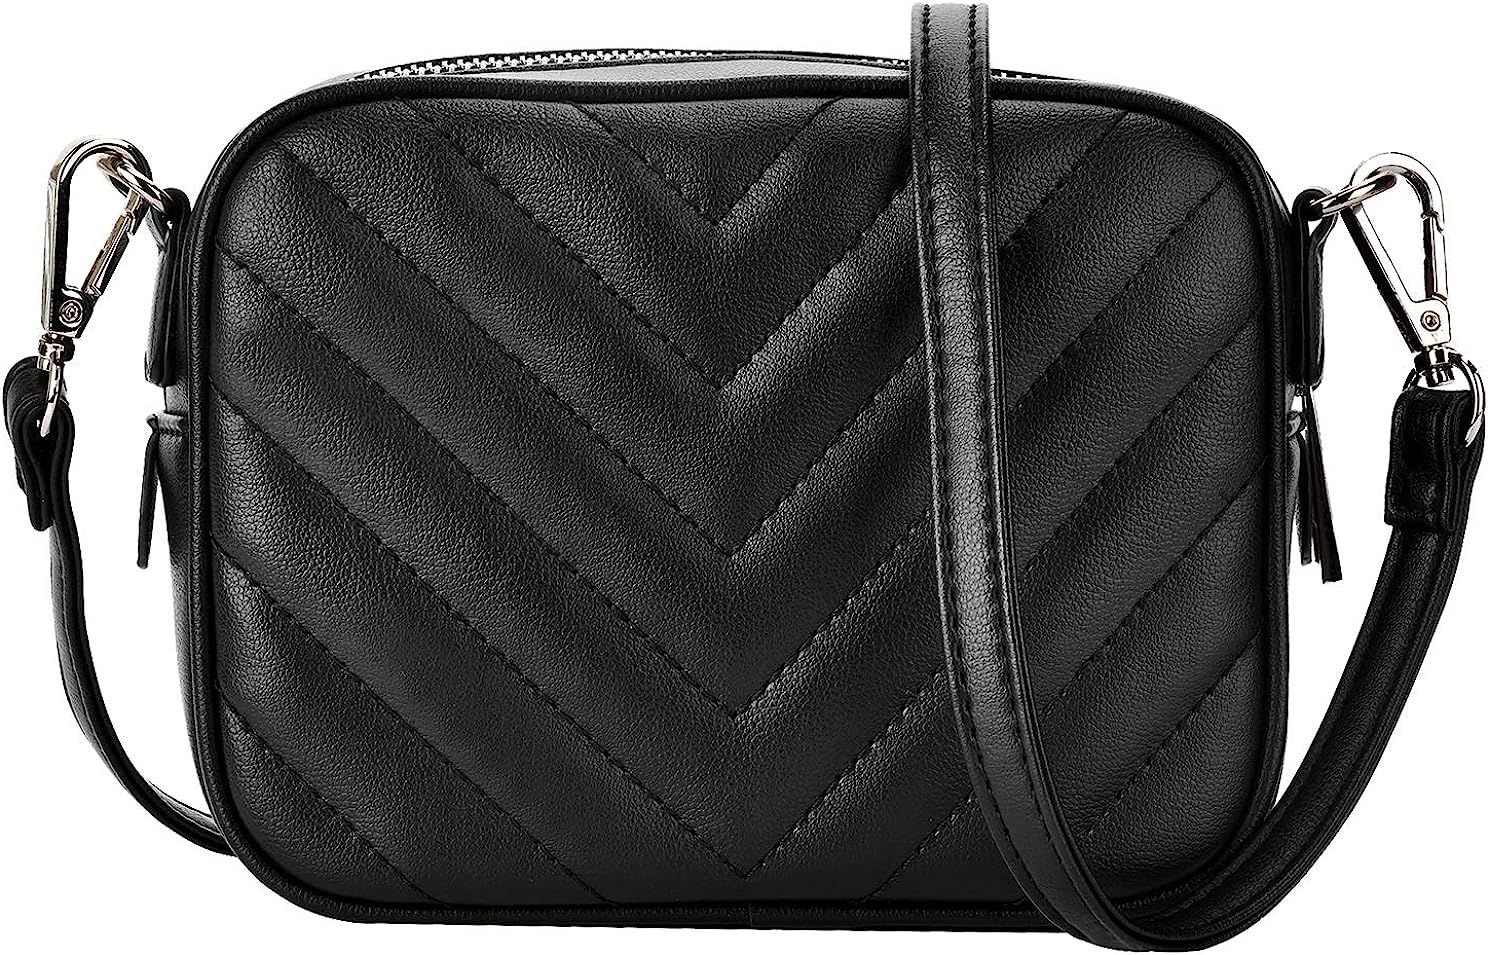 CARM AXKO Luxury Crossbody Shoulder Bag Quilted with Zipper for Women | Amazon (US)